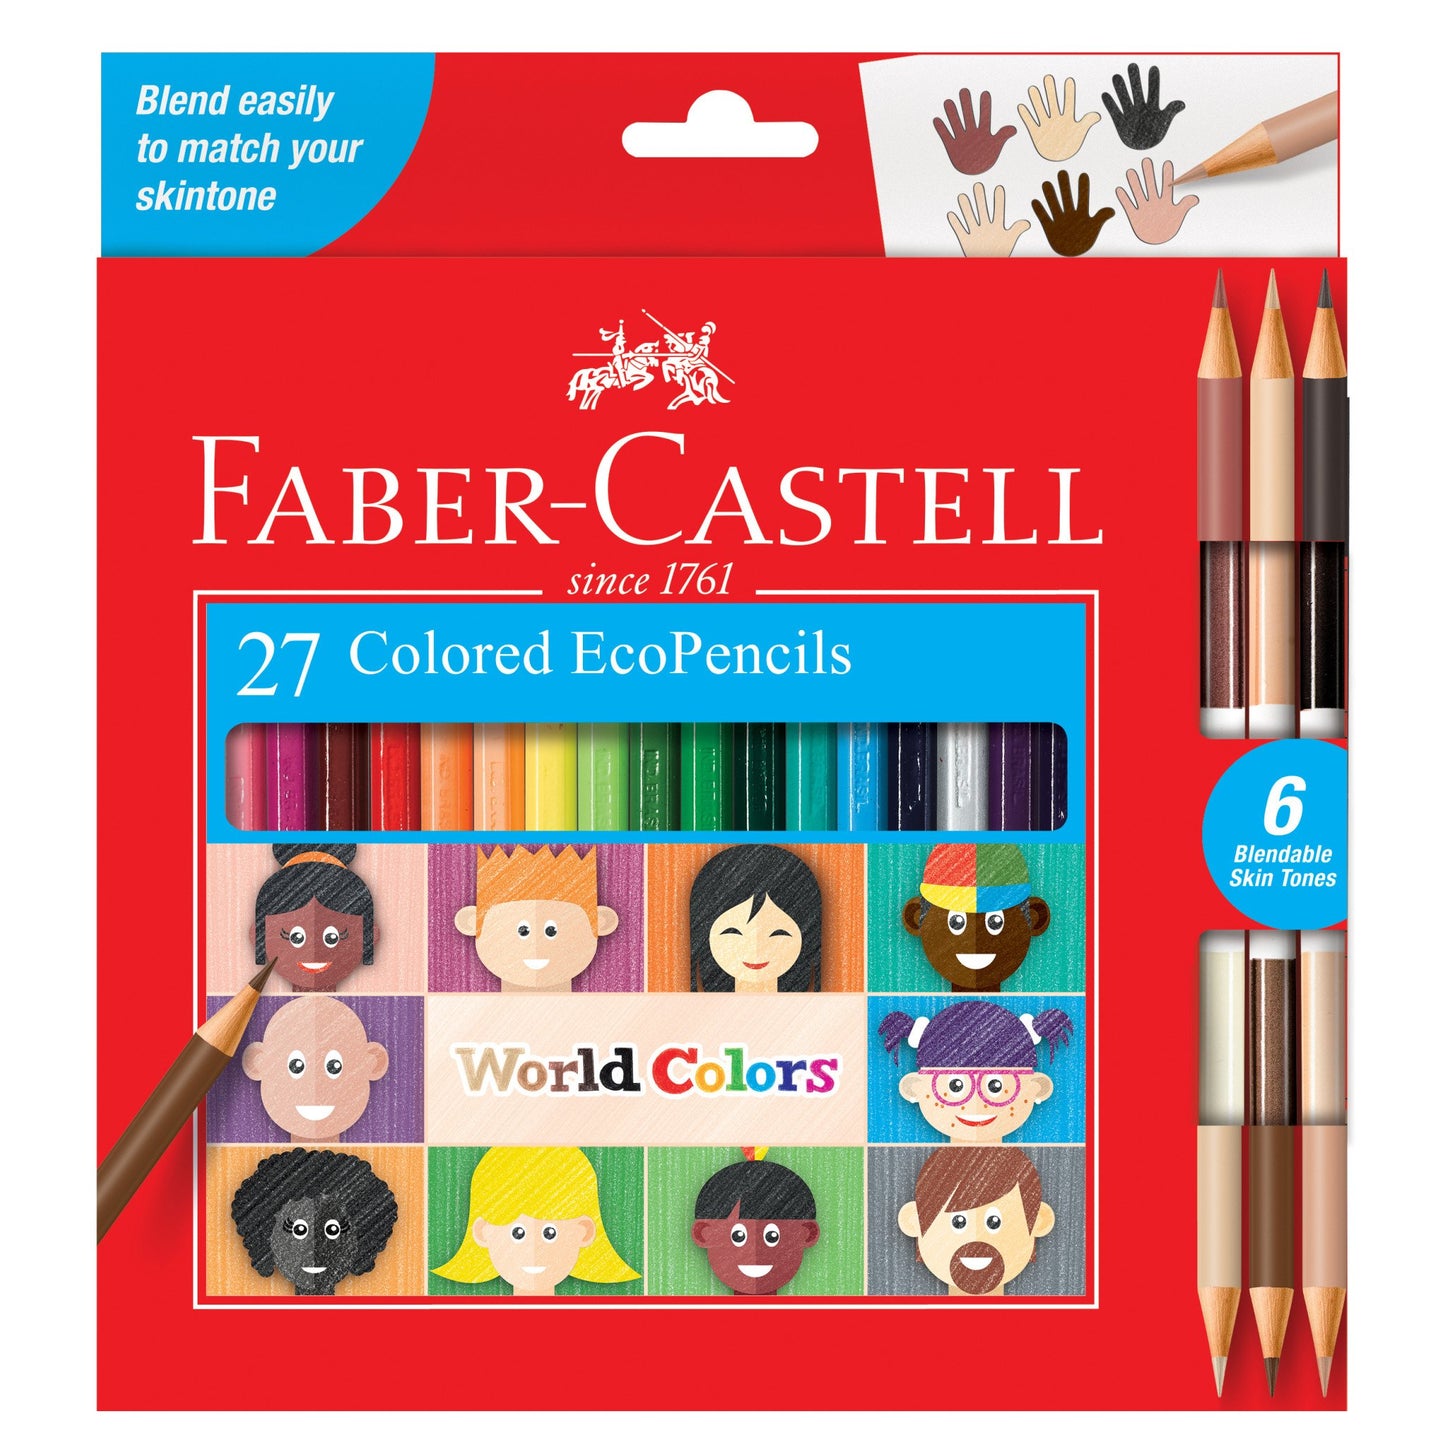 World Colors Colored EcoPencils, Set of 27